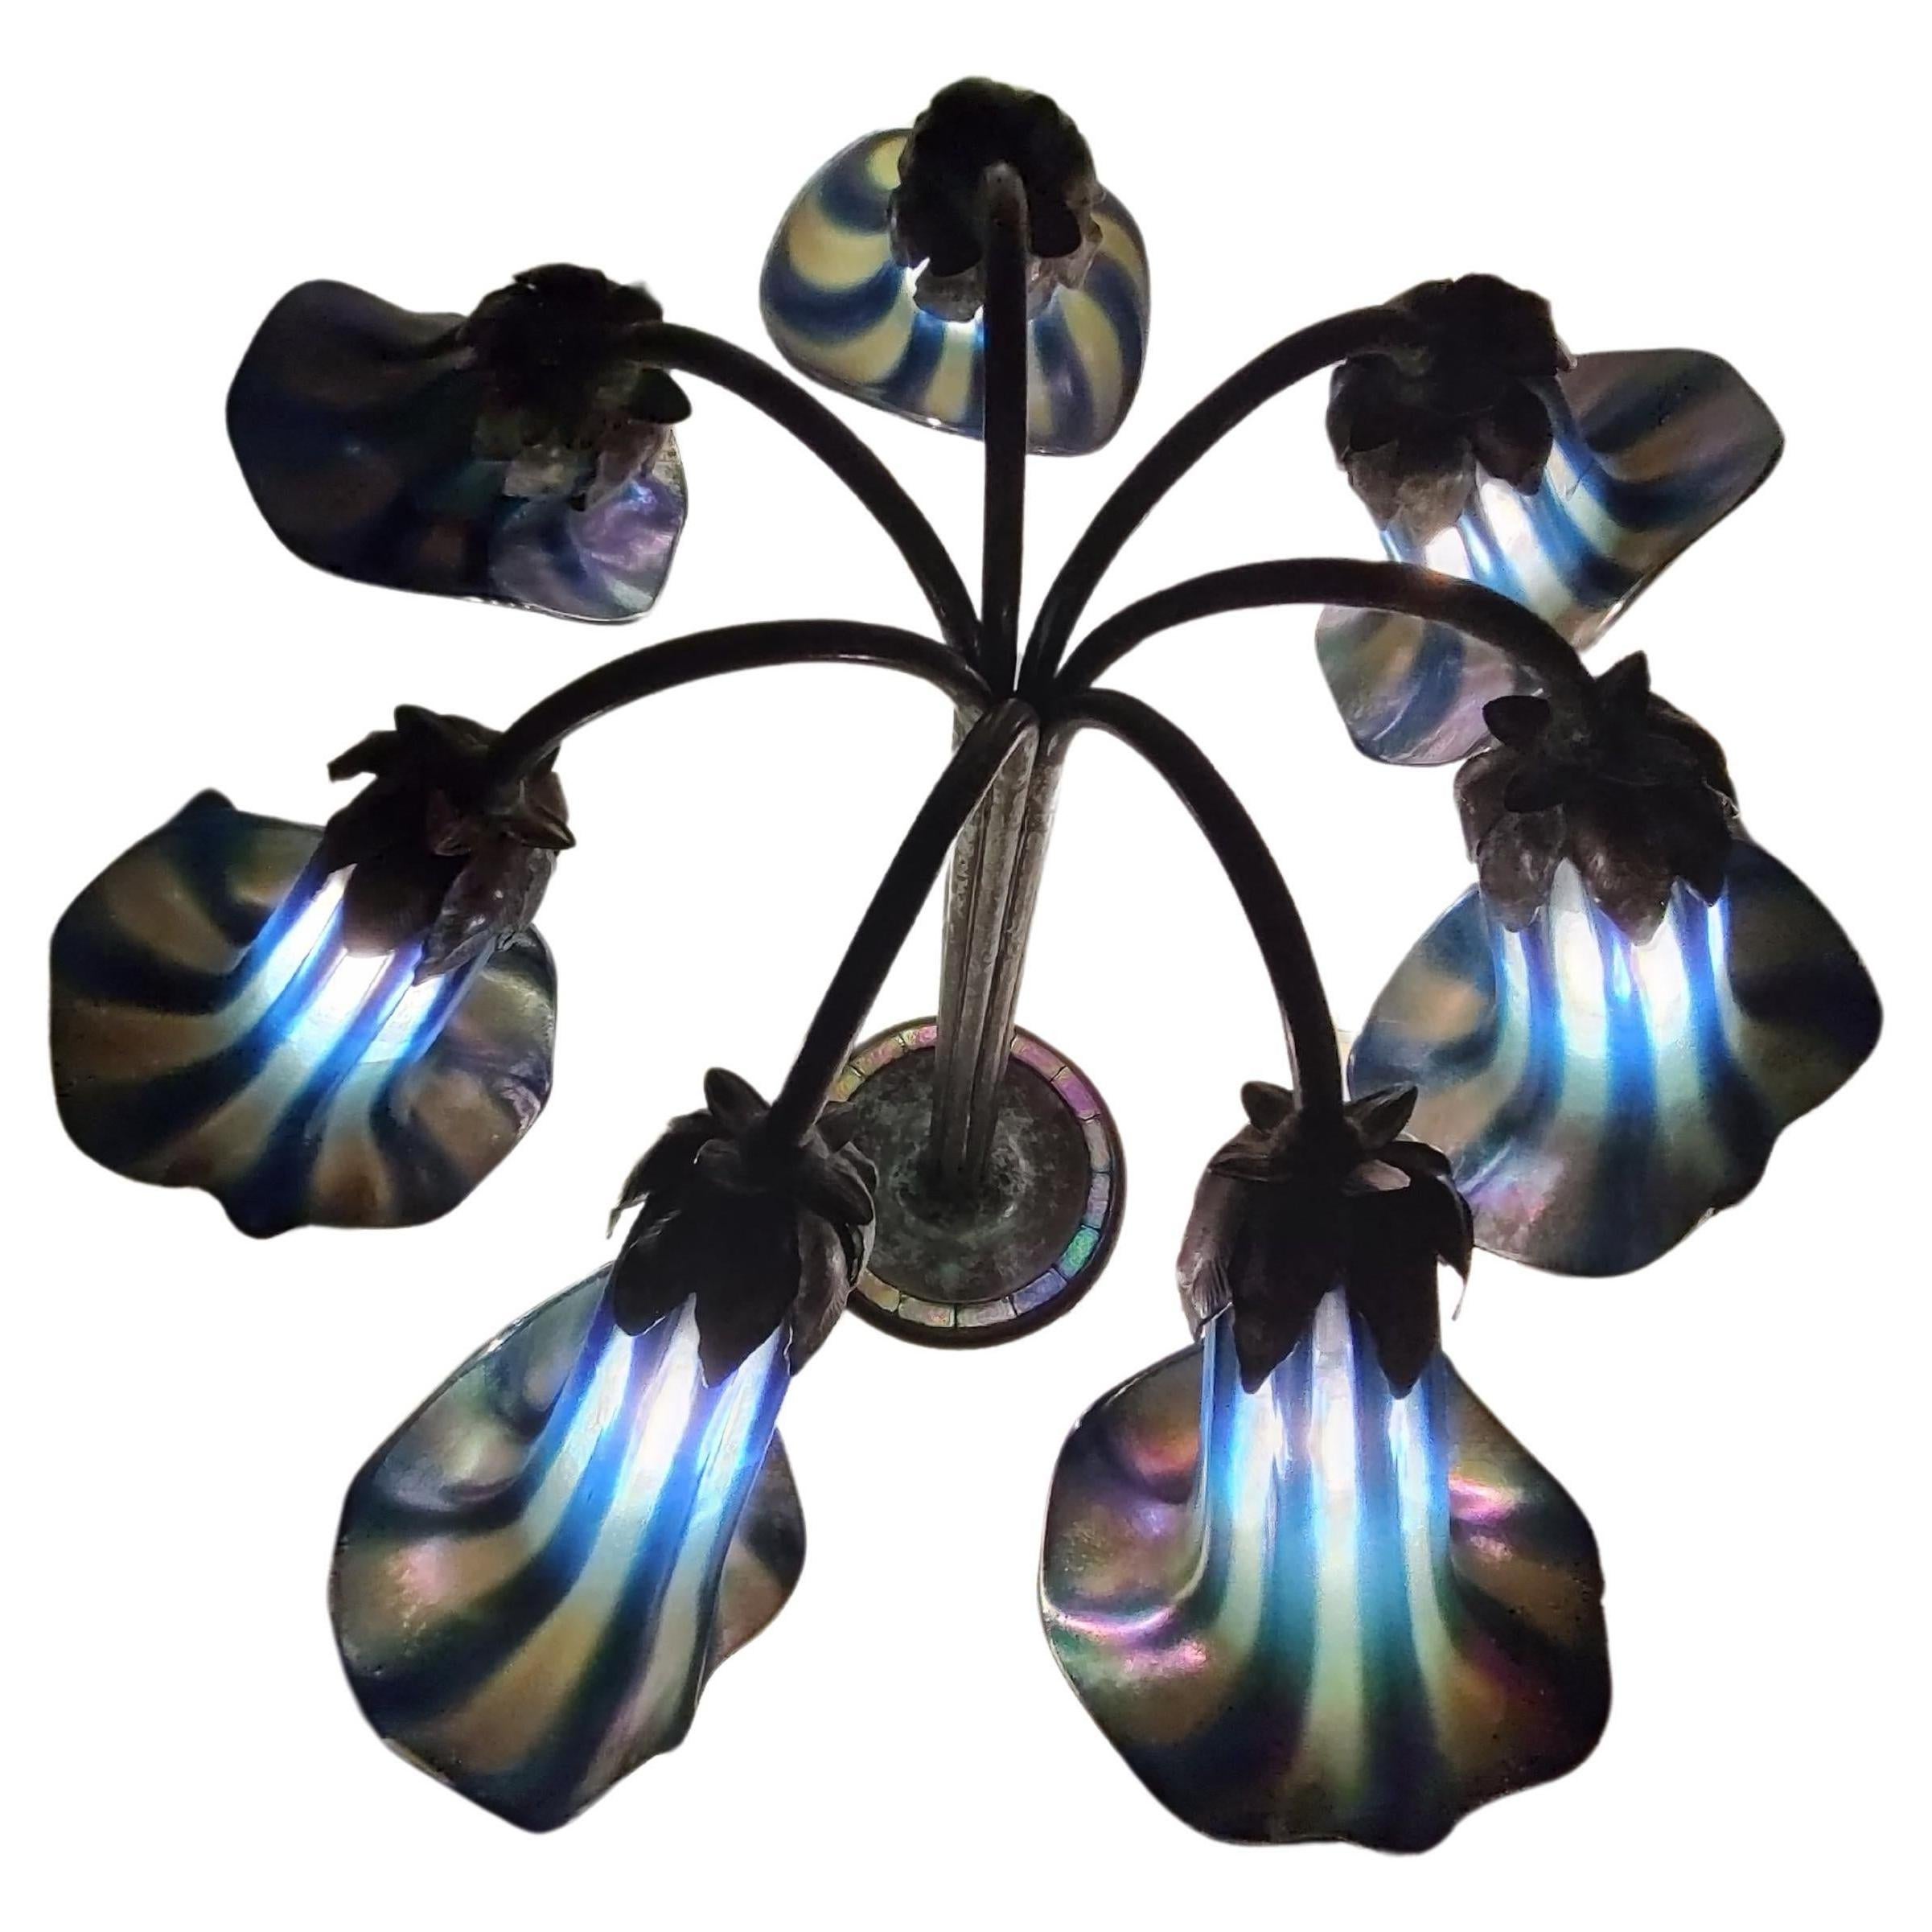 Hand-Crafted Tiffany Style Seven Light Lily Lamp  Favrille Glass Base Signed Tiffany Studios For Sale